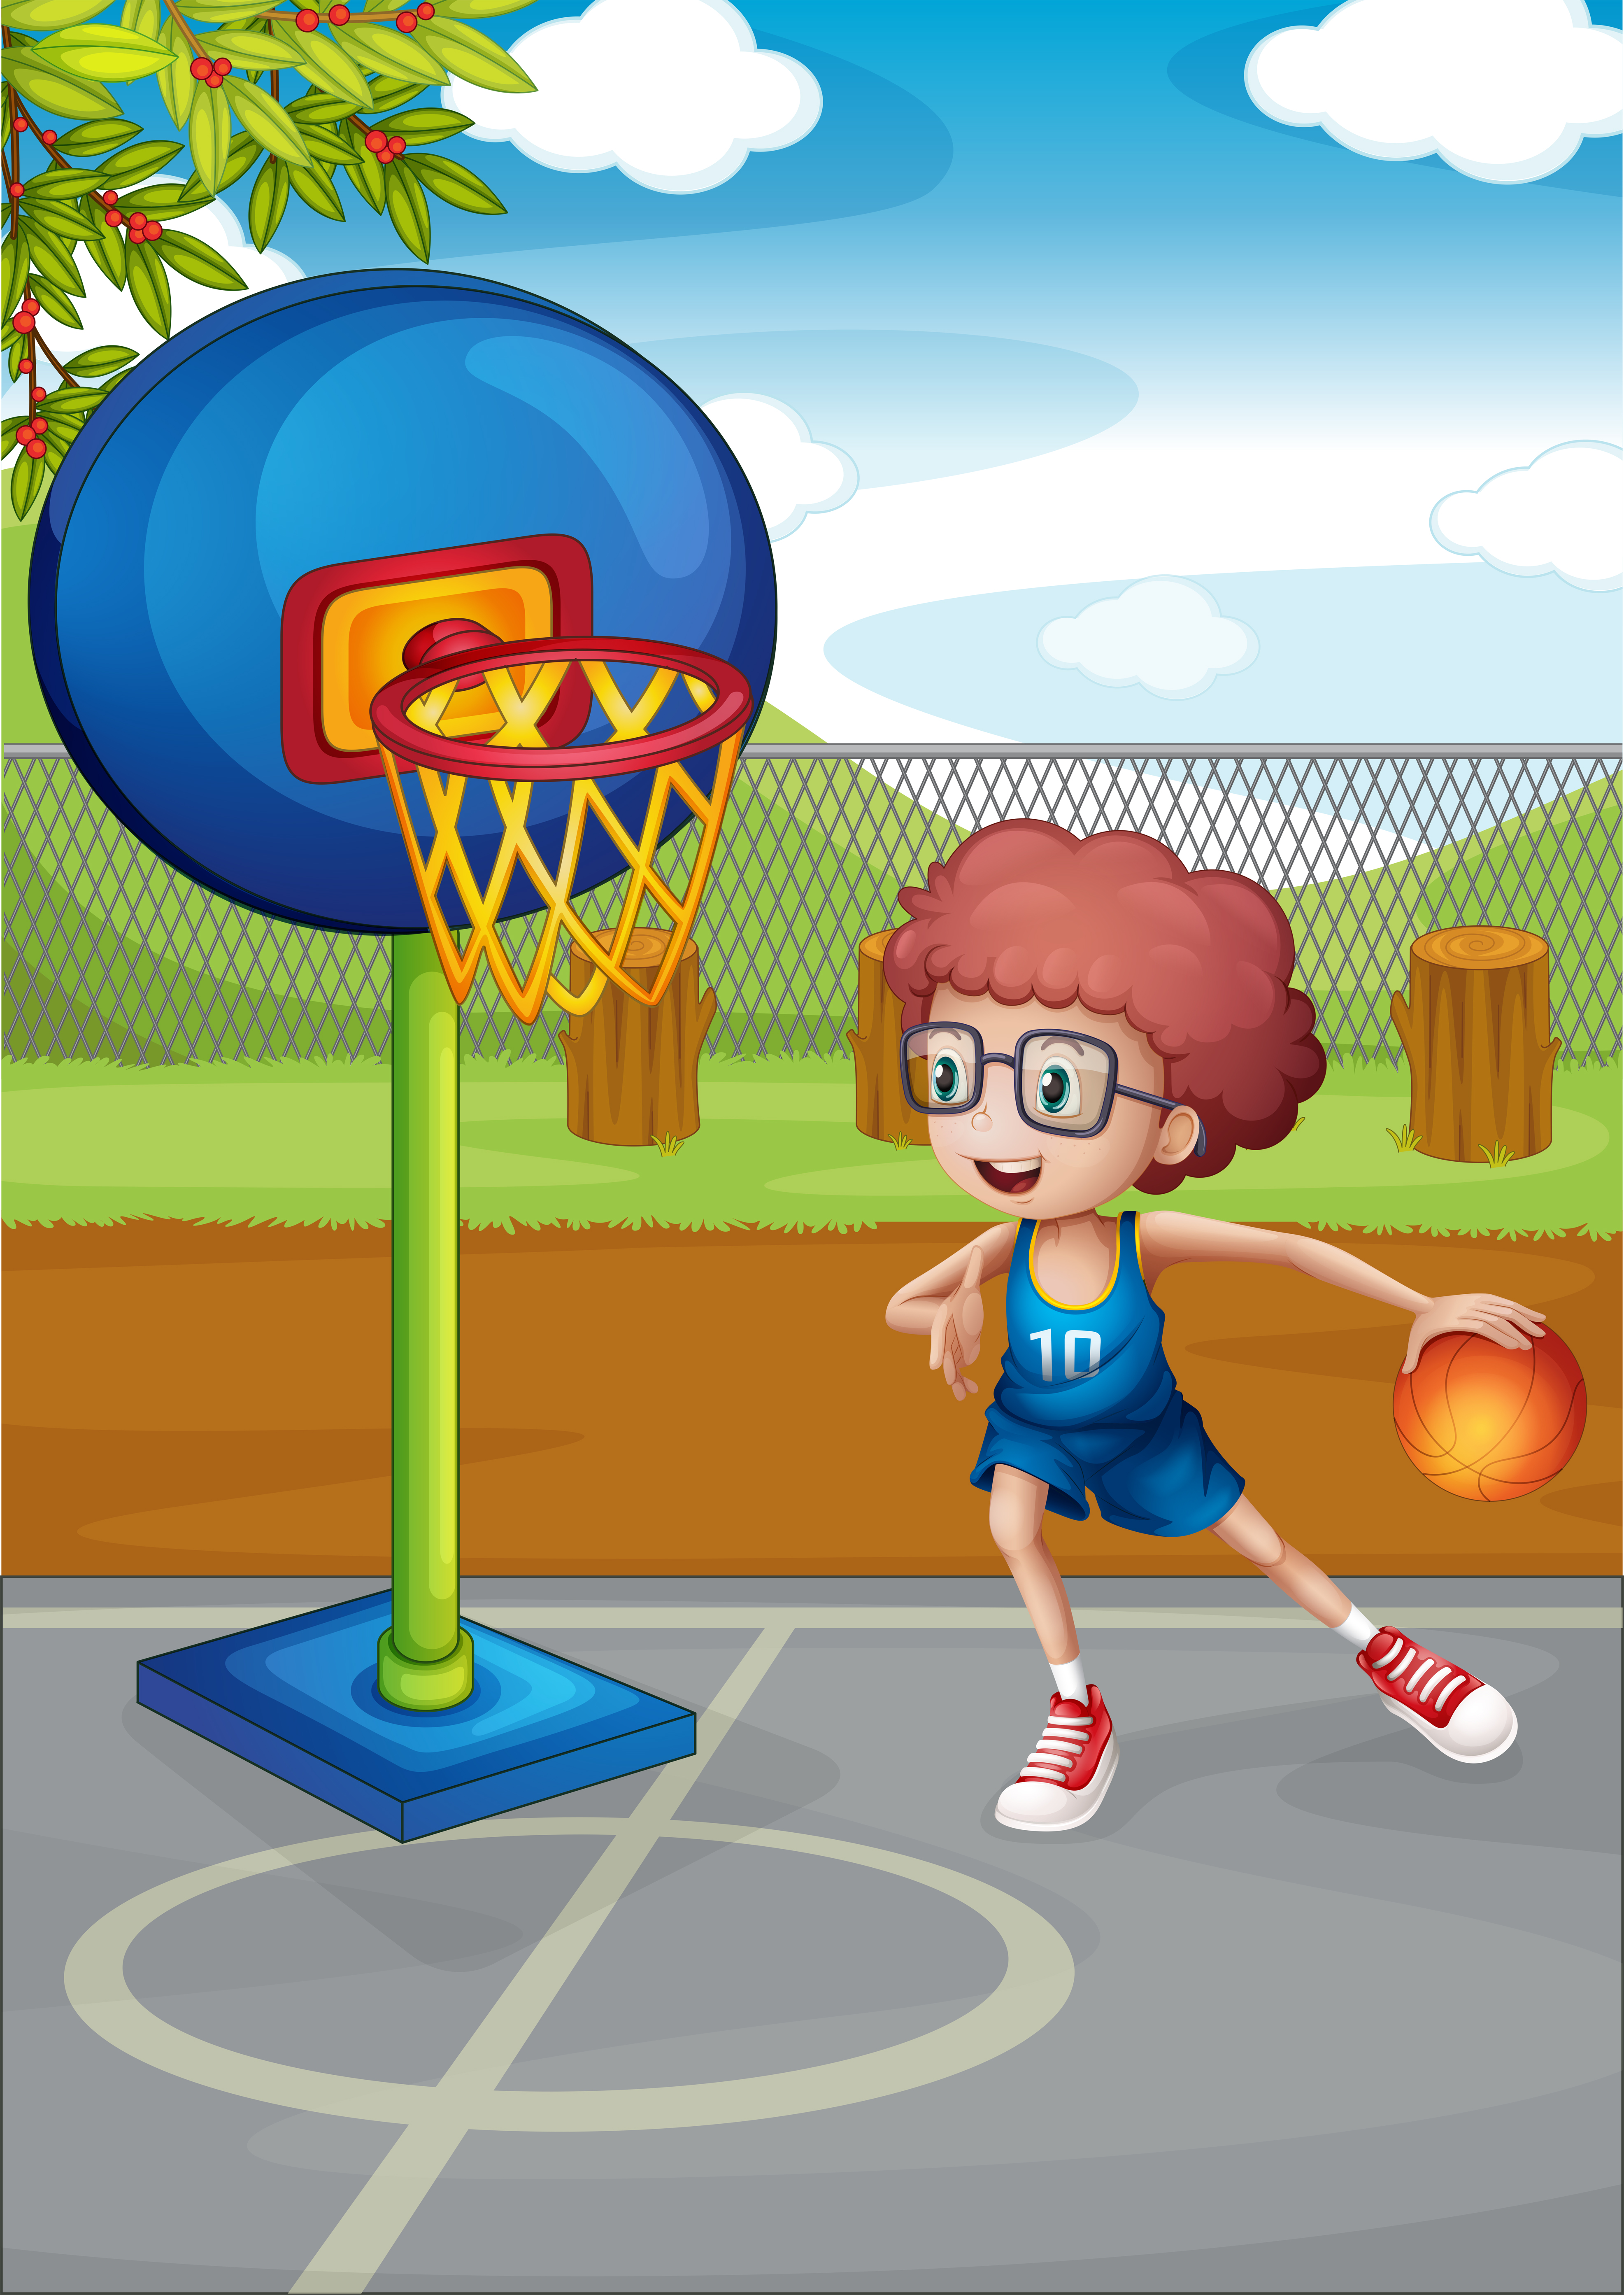 A boy playing basketball 521278 - Download Free Vectors, Clipart